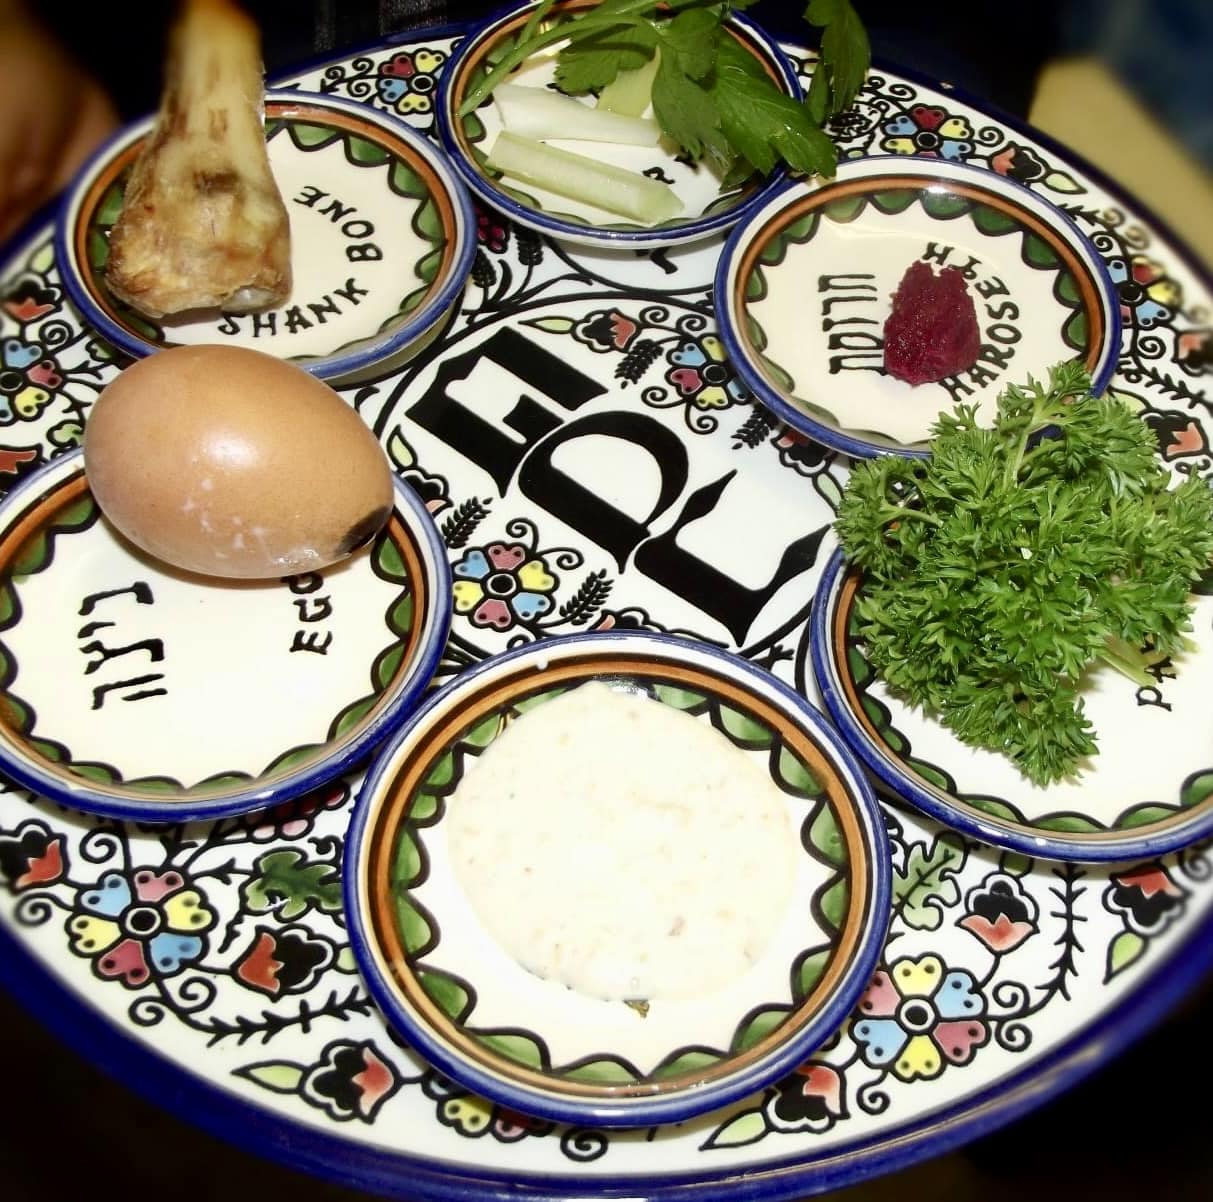 Happy Passover to all my Jewish readers! With sincere hope for peace and understanding throughout our fragile world